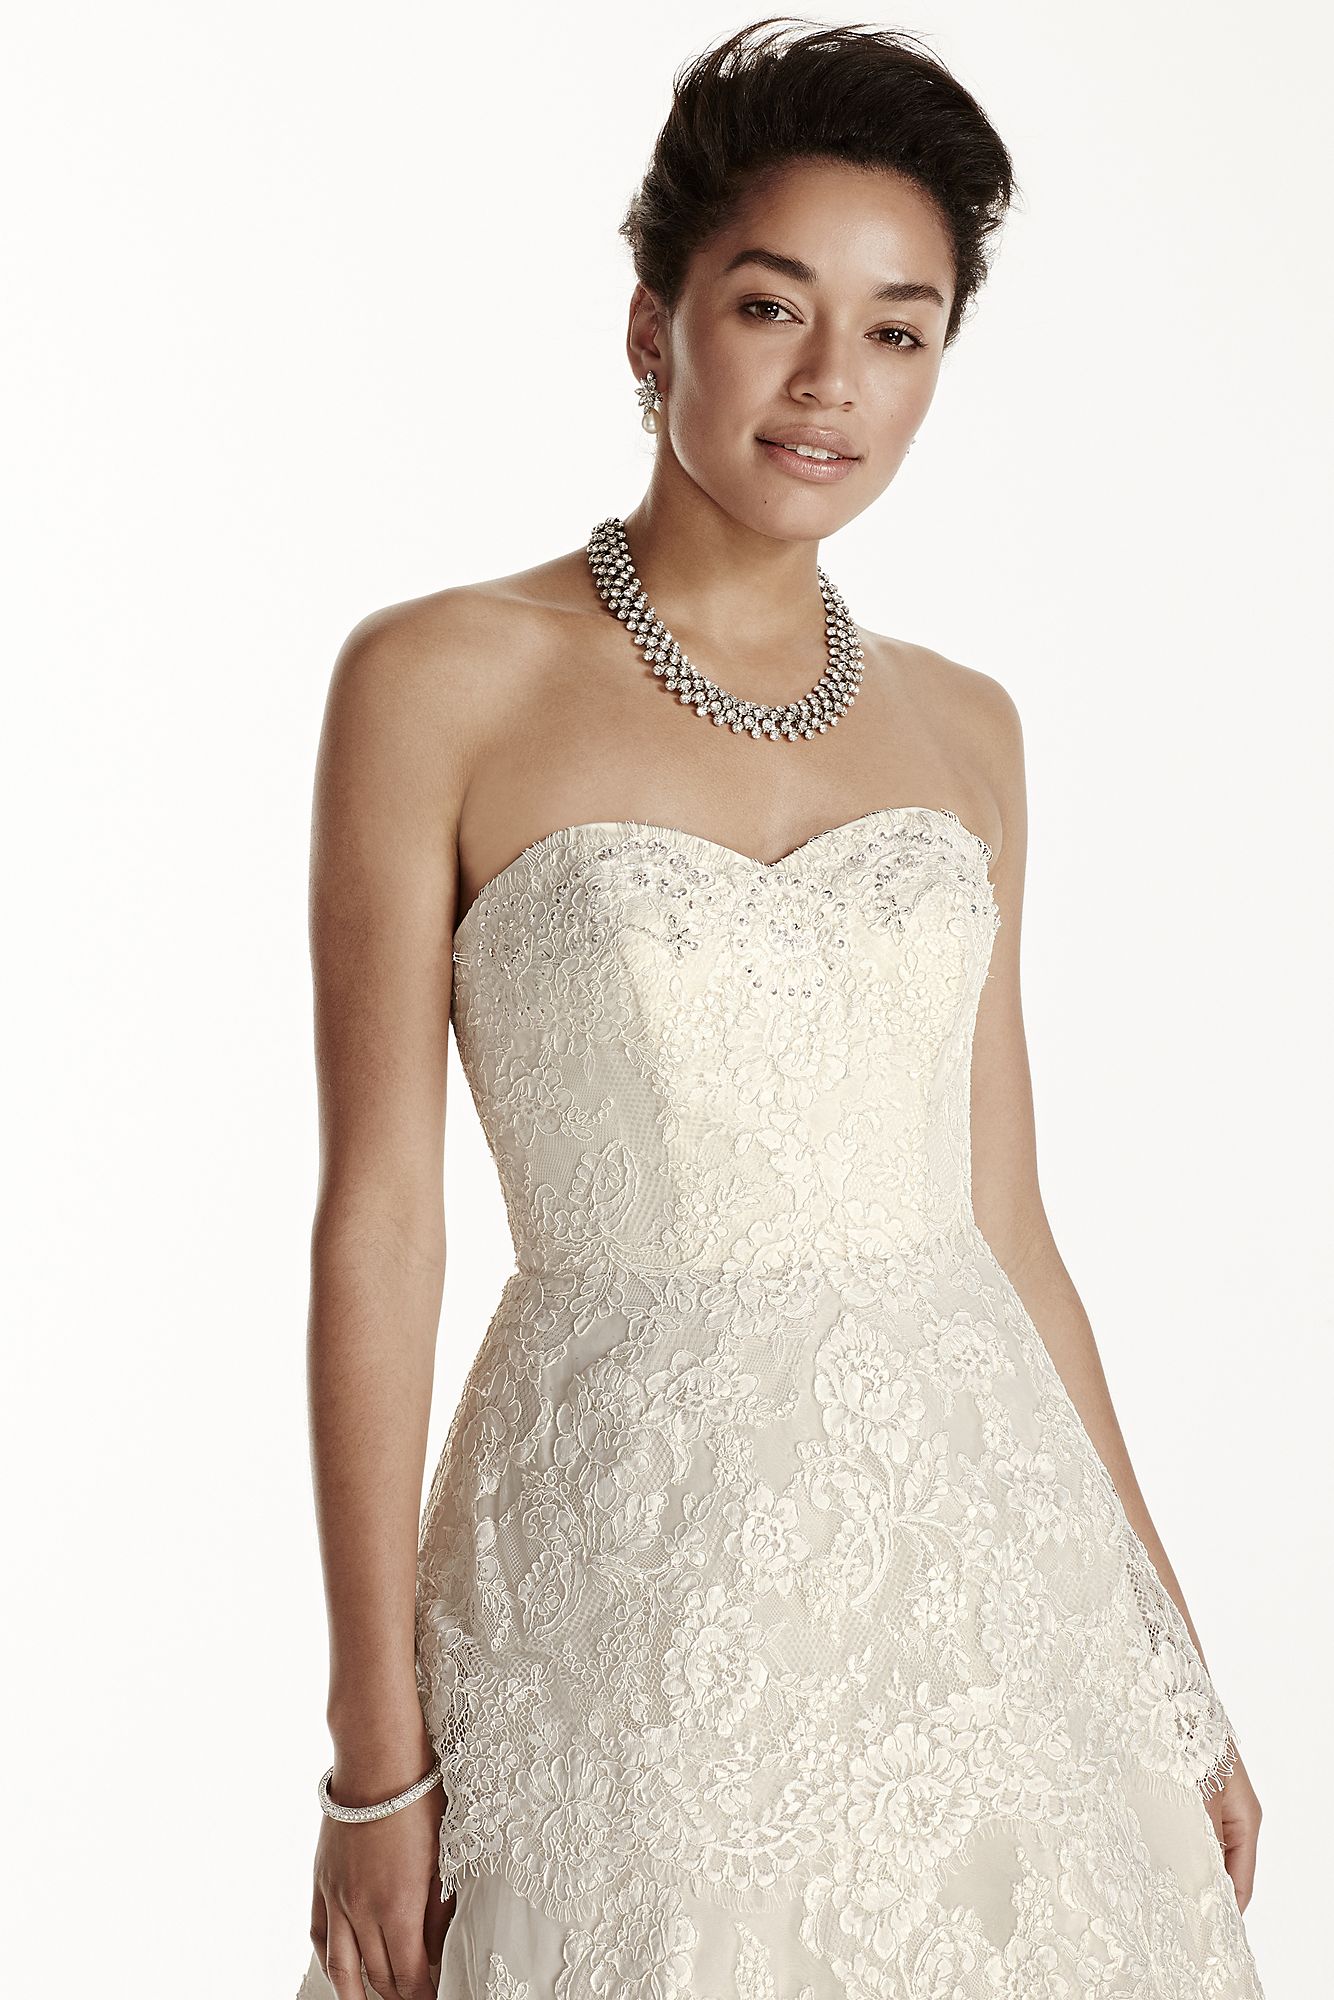 Strapless Sweetheart Beaded Lace A-line Dress CWG699